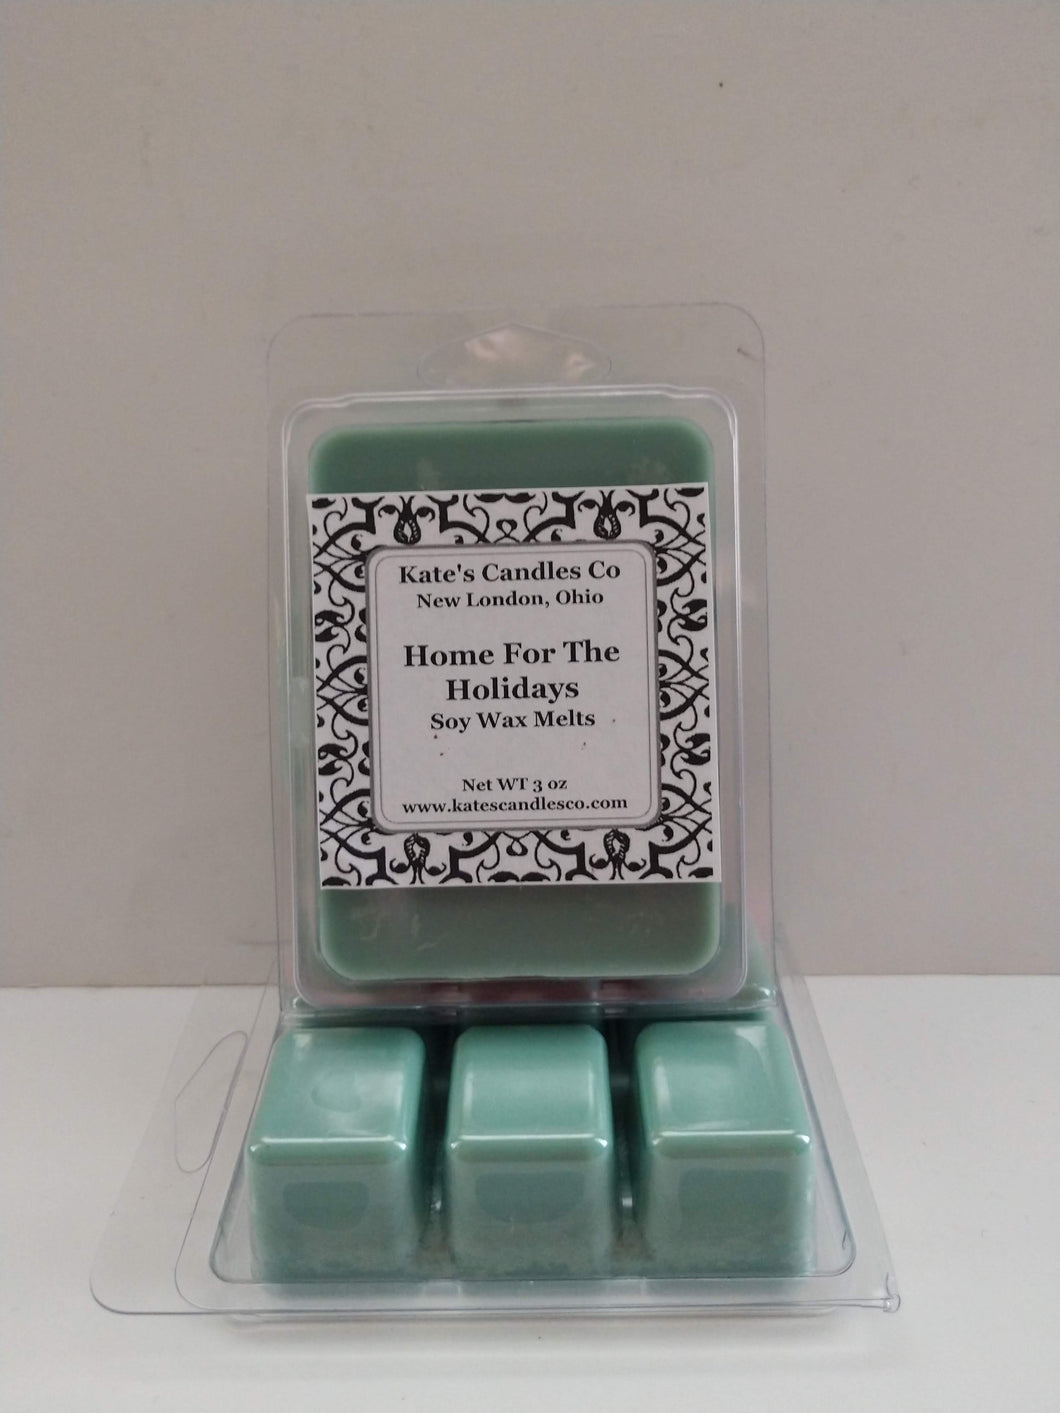 Home For The Holidays Soy Wax Melts - Kate's Candles Co. Soy Candles